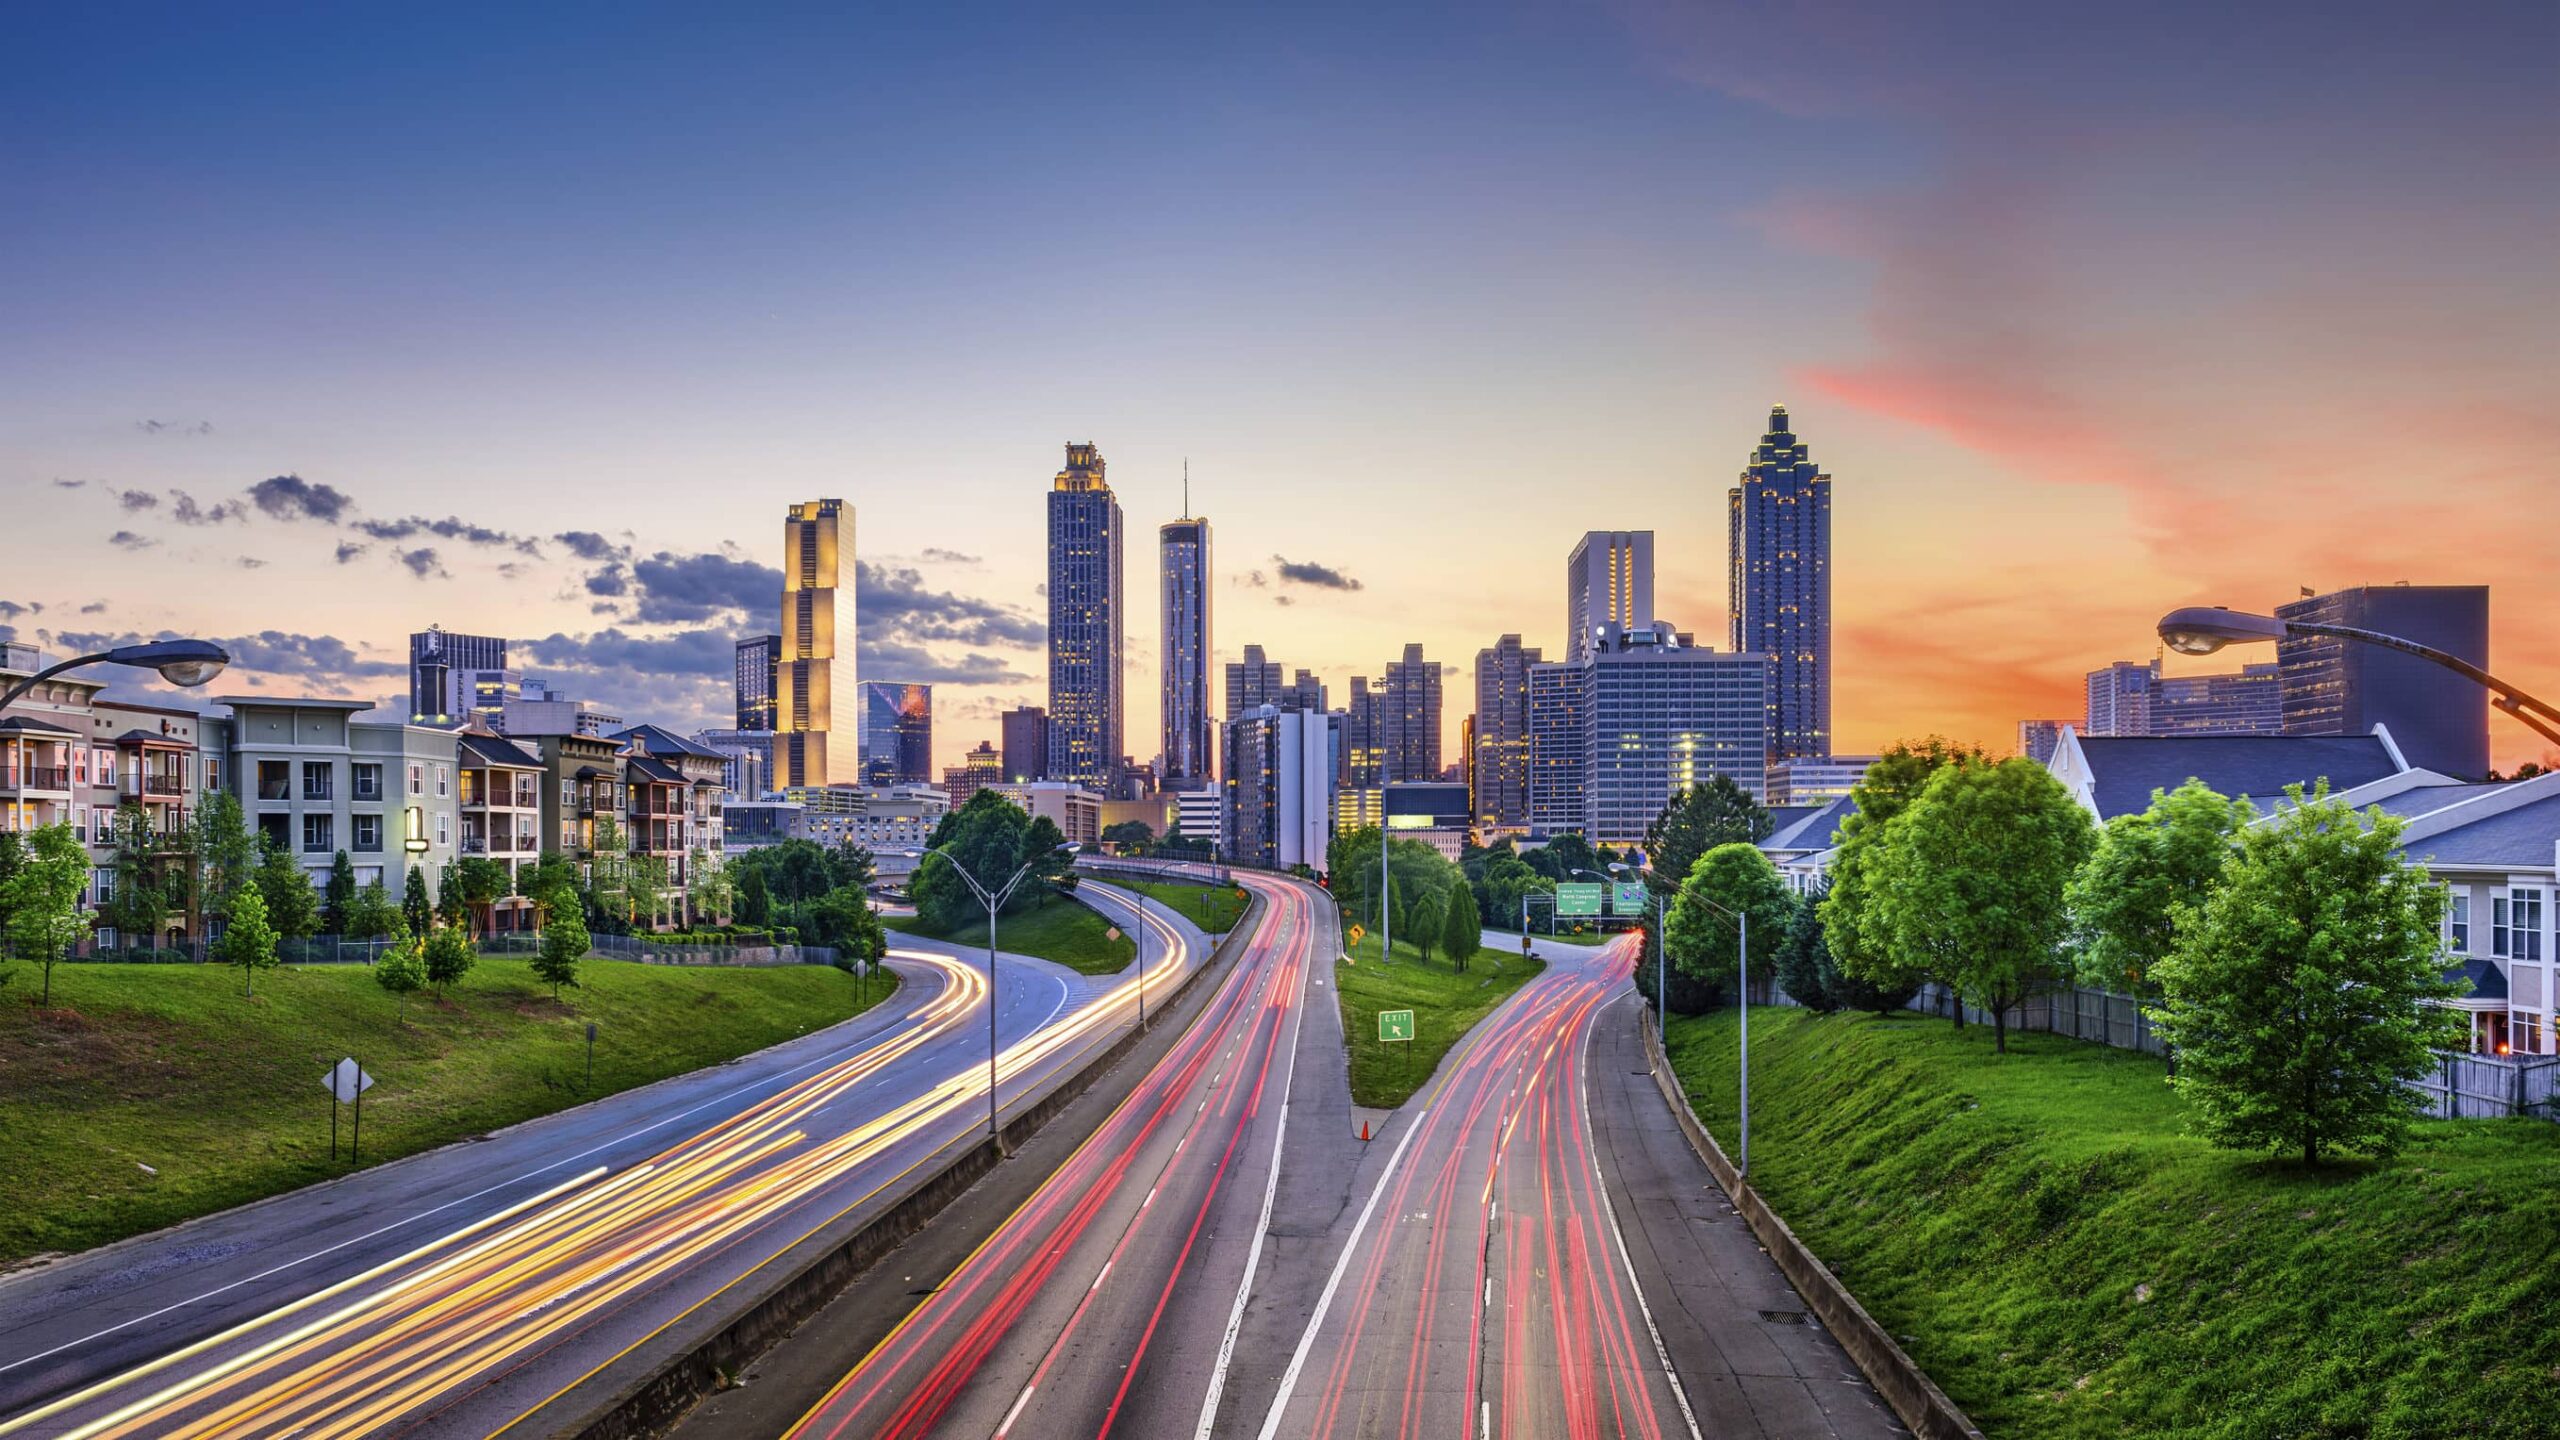 Project management salaries in Georgia are increasing with the demand. This image portrays the city of Atlanta, Georgia, which is home to many project managers.